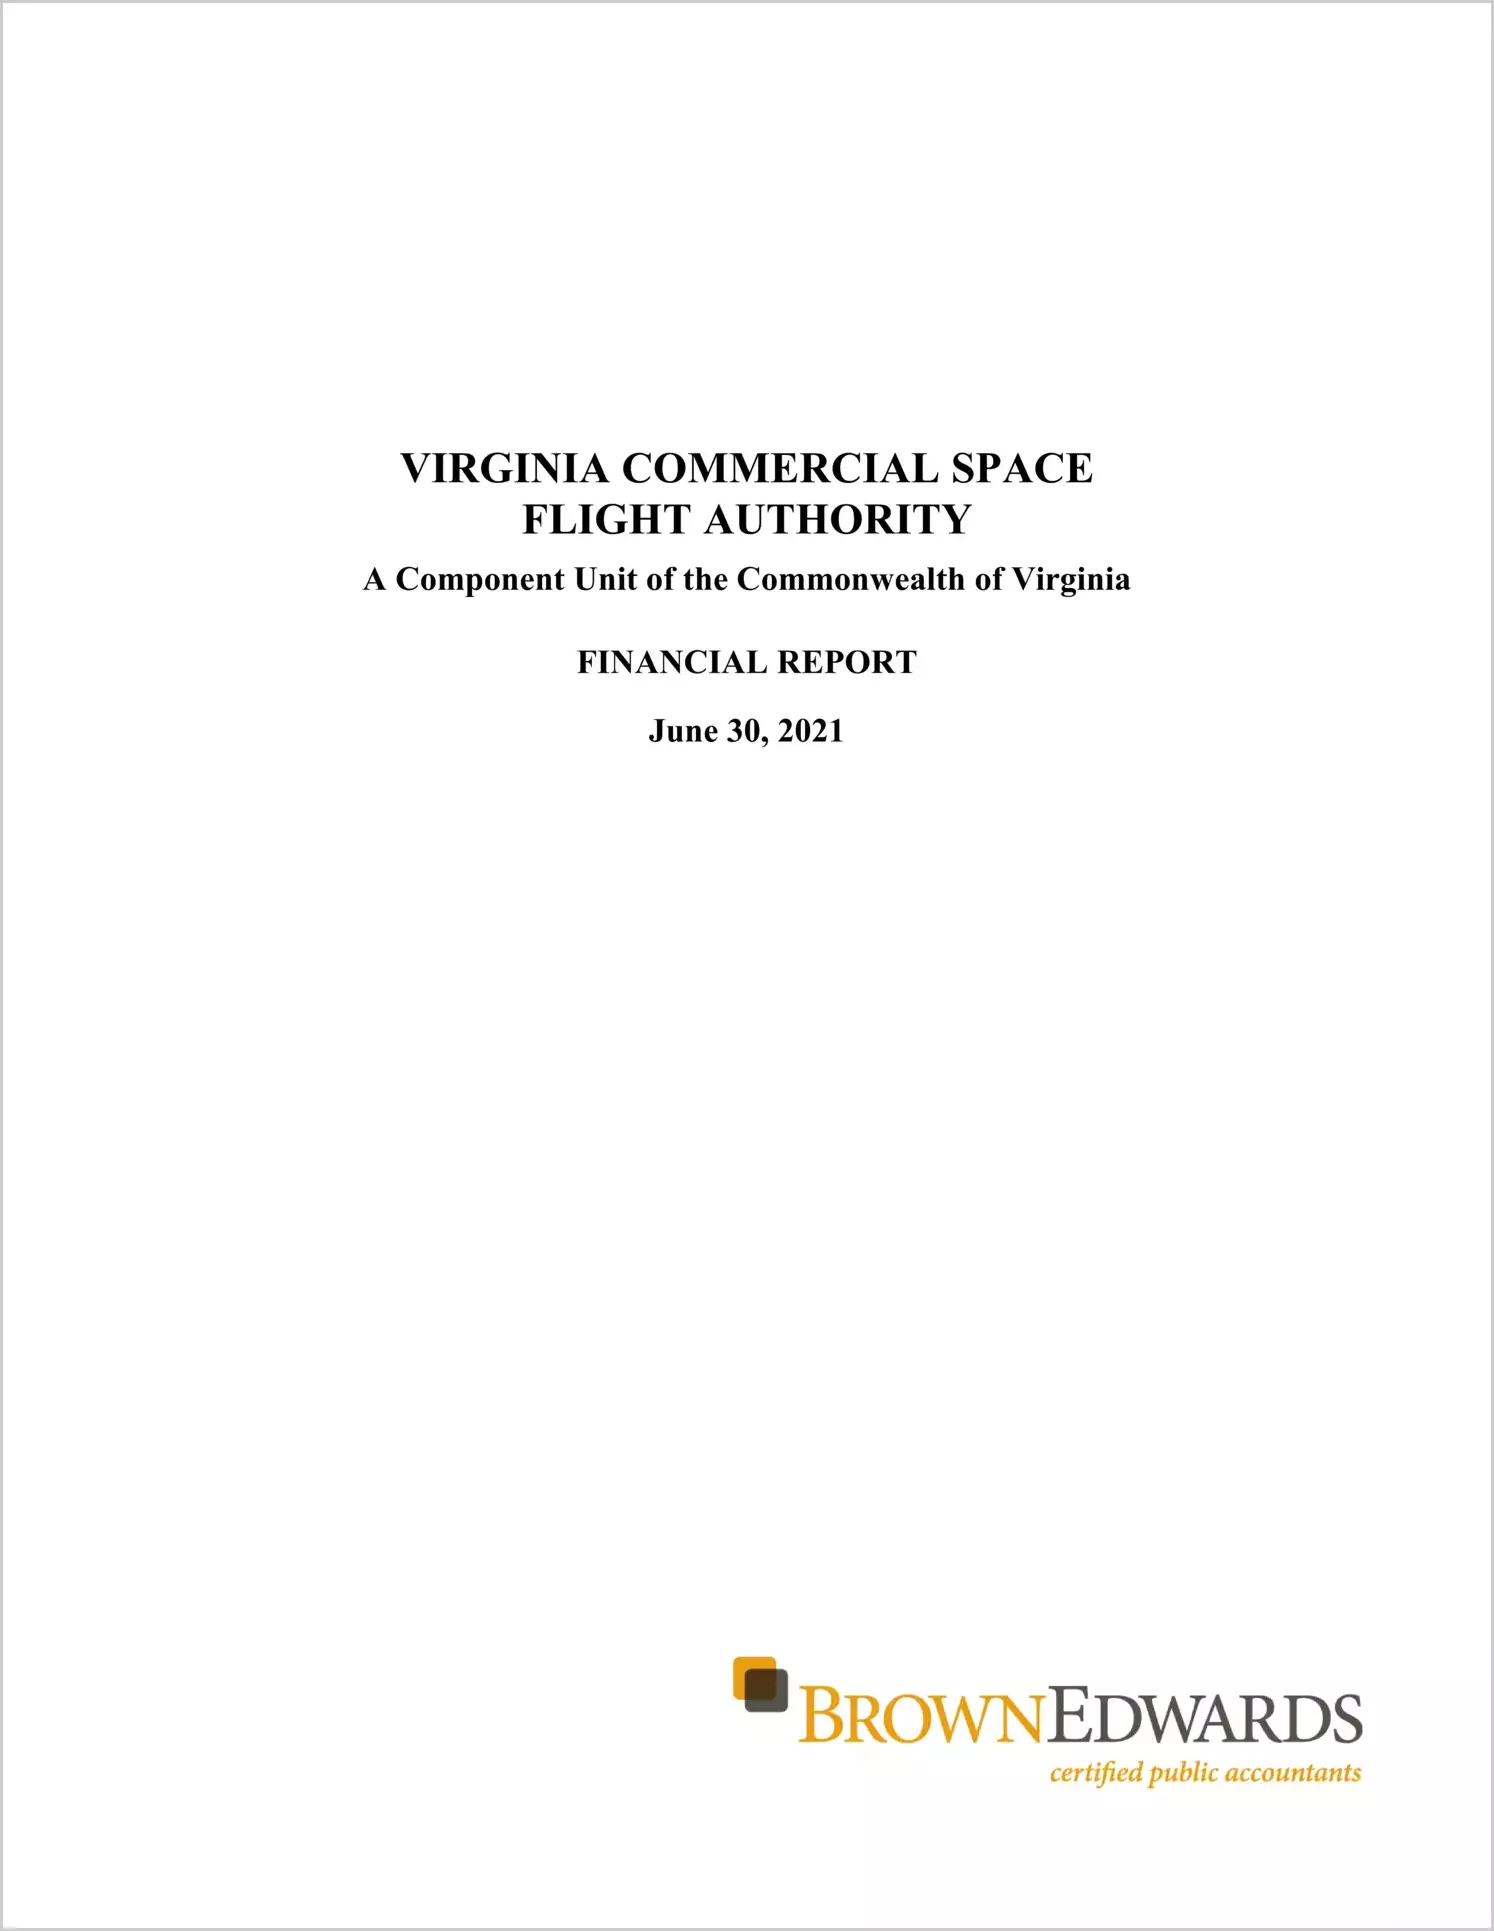 Virginia Commercial Space Flight Authority Financial Statements for the year ended June 30, 2021